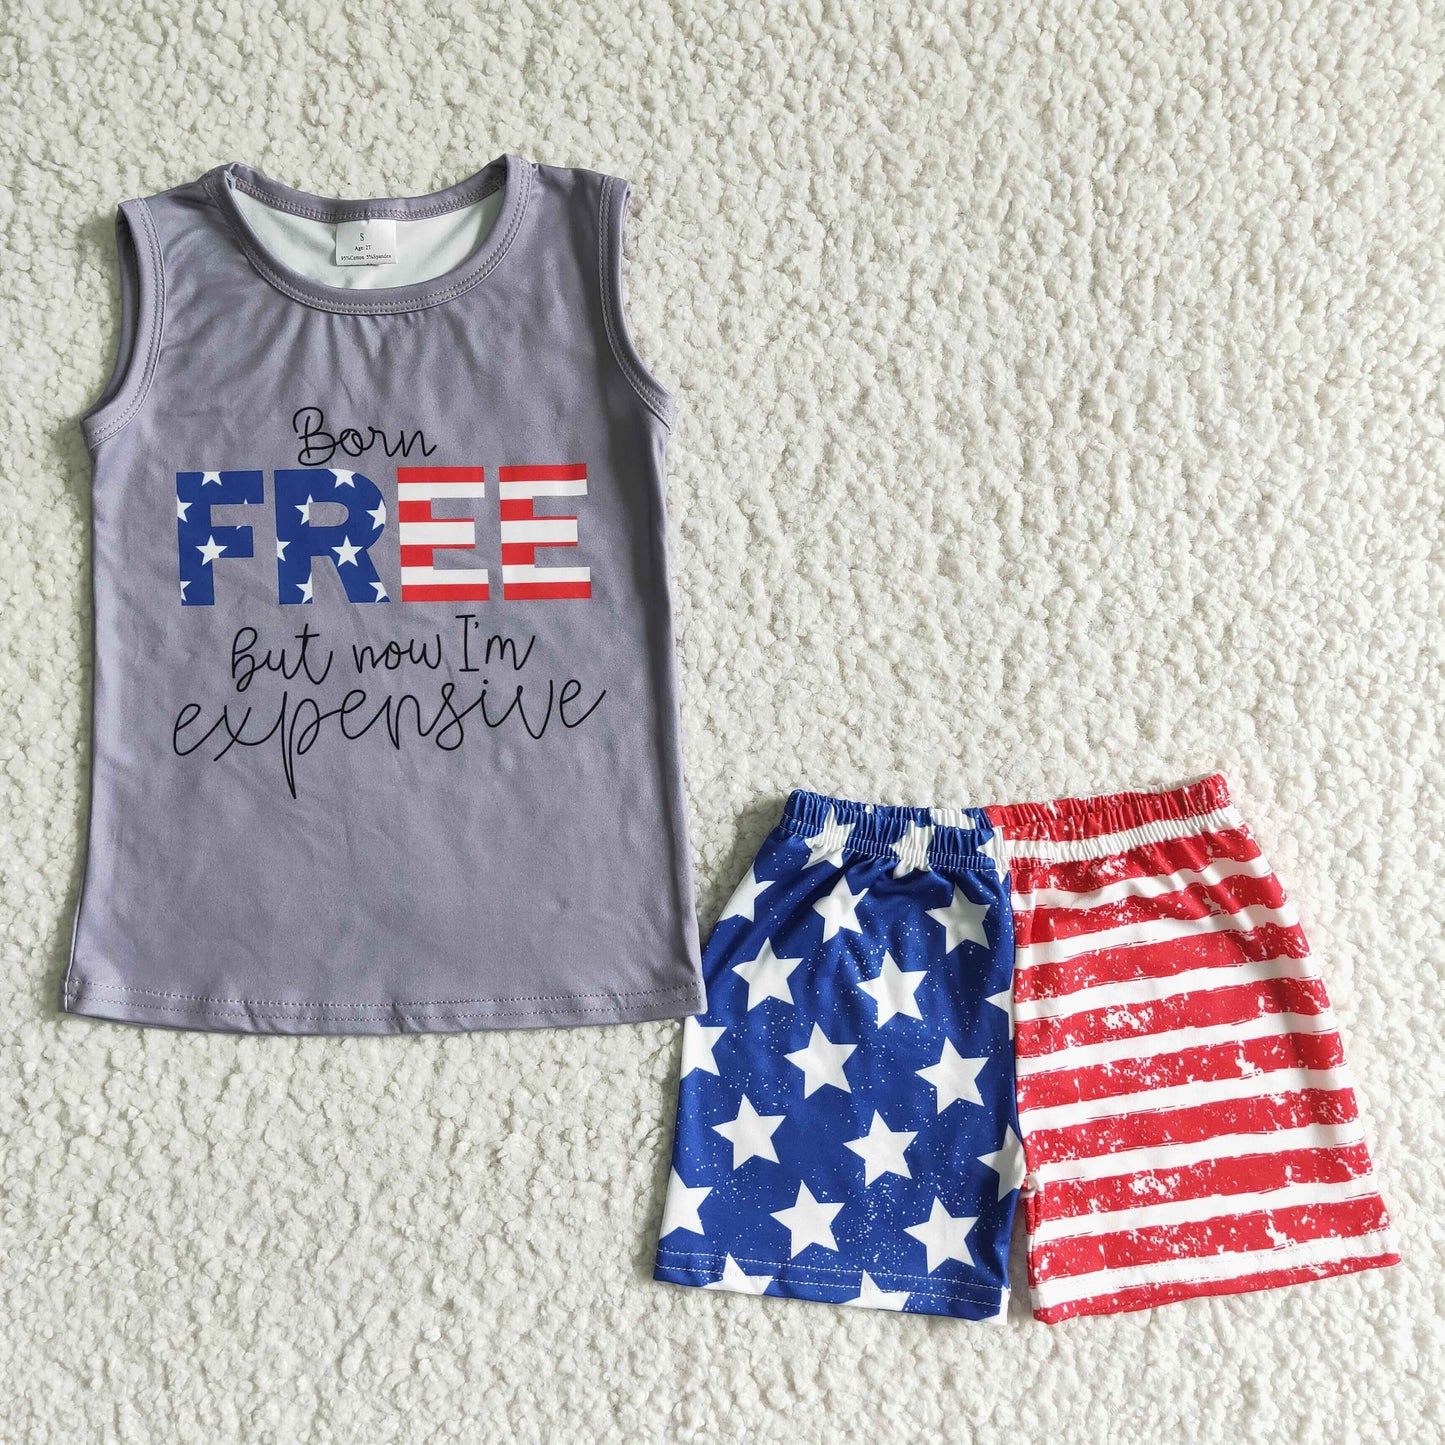 Born free but now I'm expensive shirt shorts boy 4th of july clothing